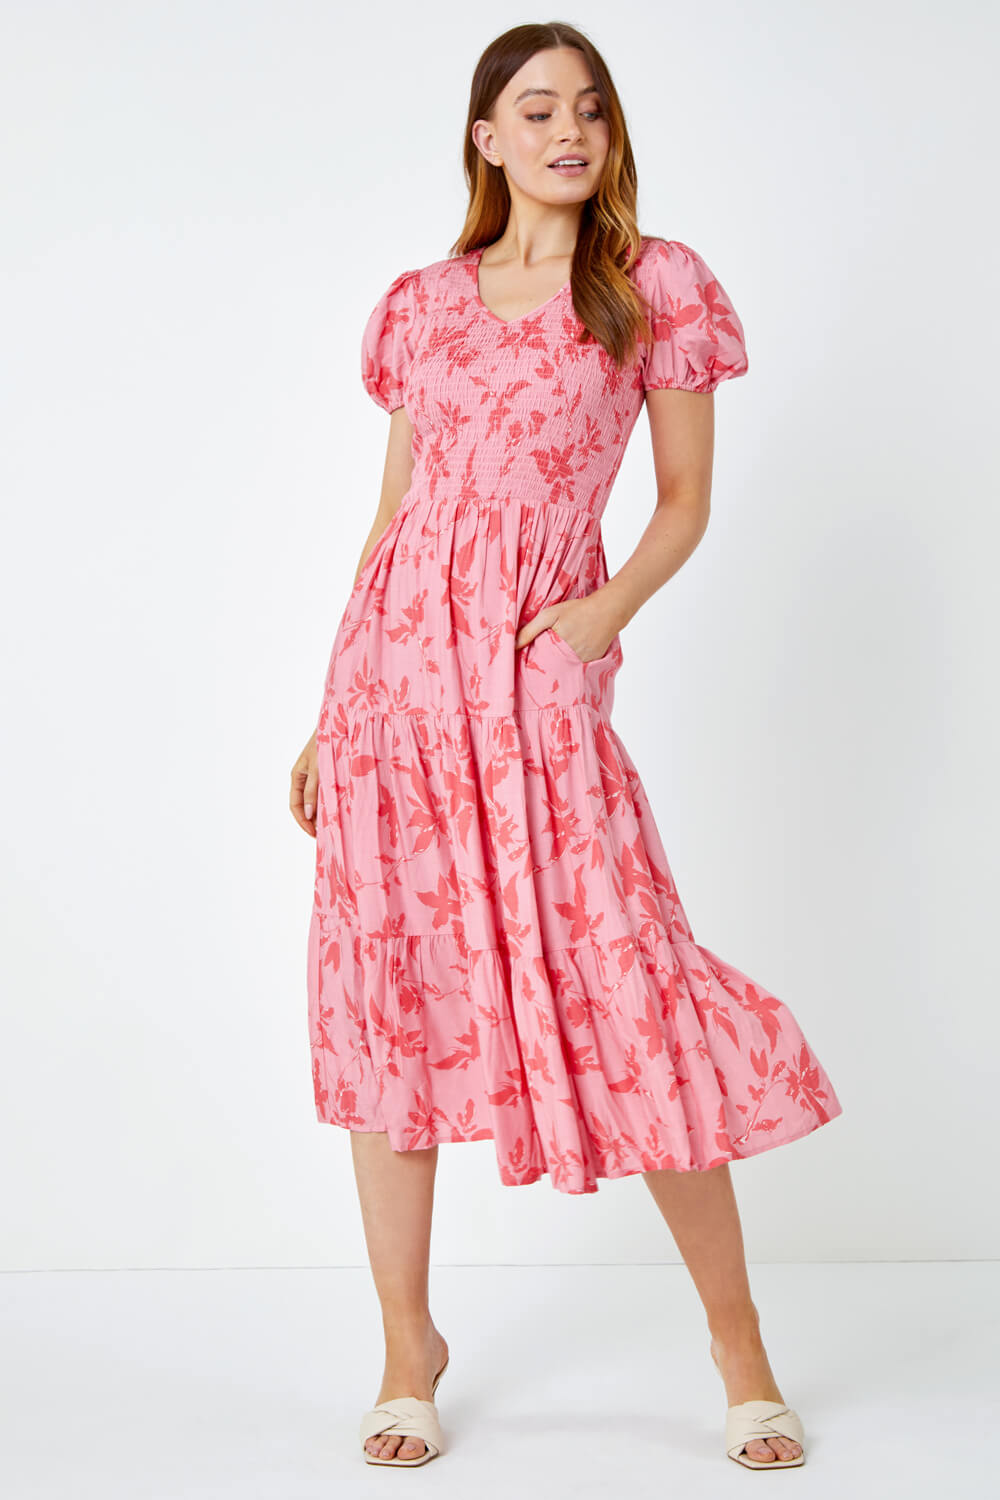 PINK Floral Shirred Waist Tiered Midi Dress, Image 2 of 6